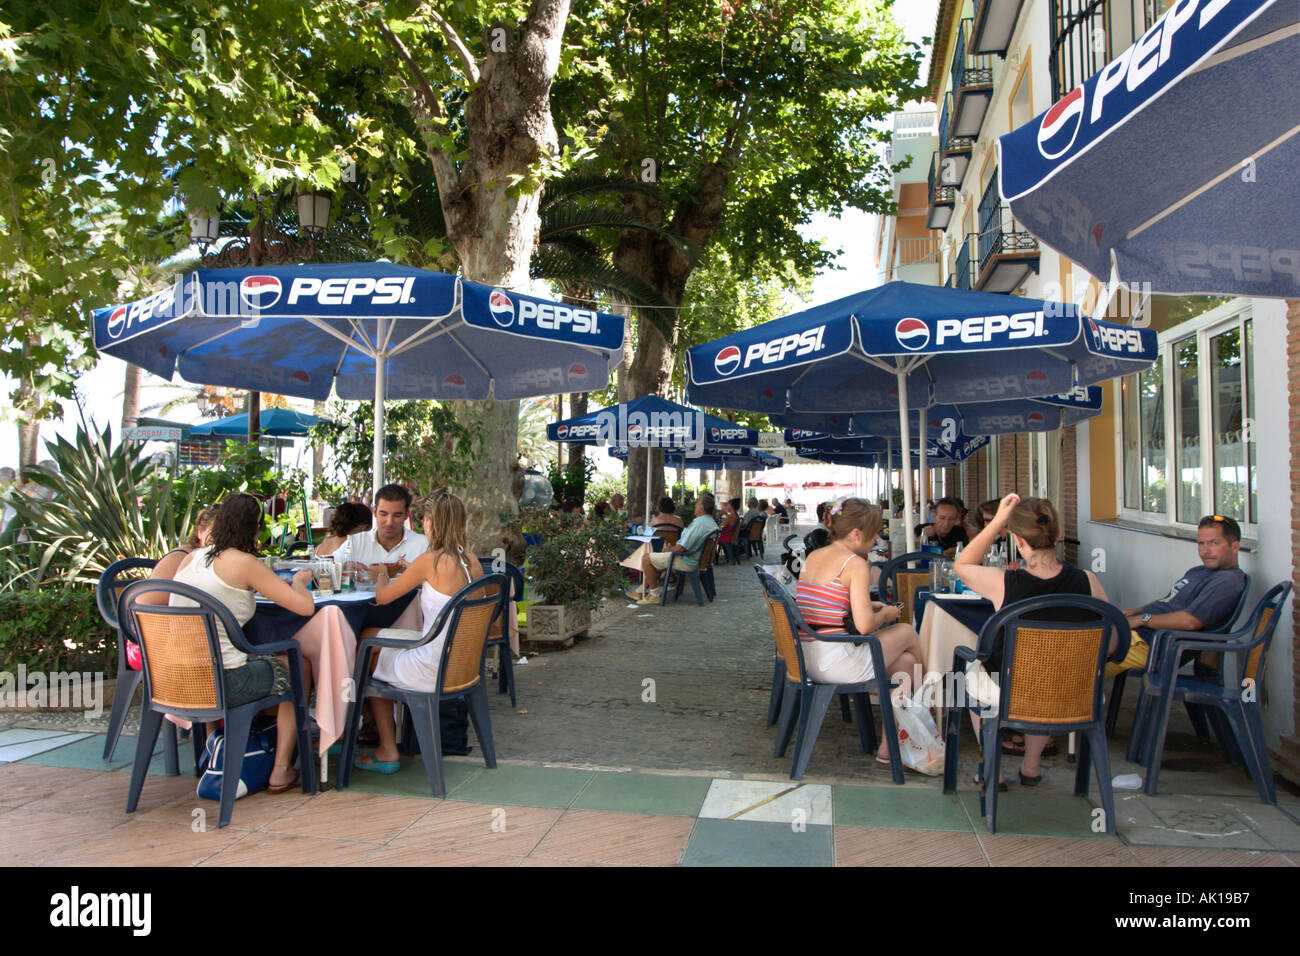 Sidewalk cafe near the Balcon de Europa in the Old Town, Nerja, Costa del Sol, Andalusia, Spain Stock Photo